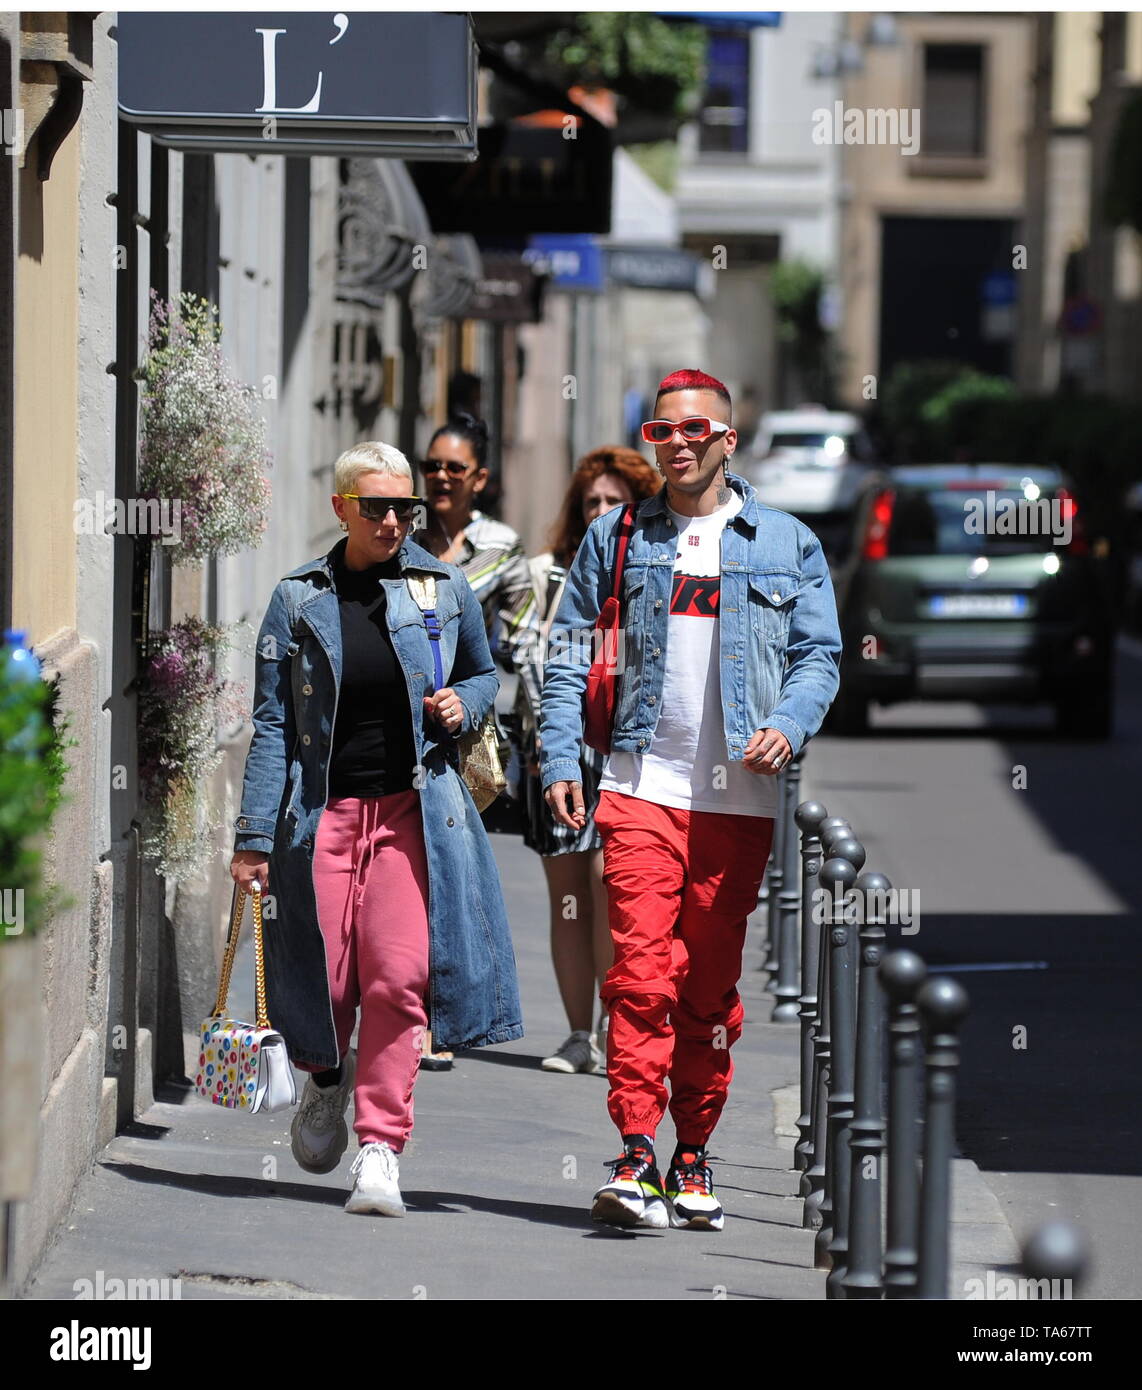 Milan, Sfera It took a lunch with a mysterious girl The rapper SFERA  EBBASTA caught lunch with a mysterious girl in a well-known restaurant in  the center. As soon as he notices